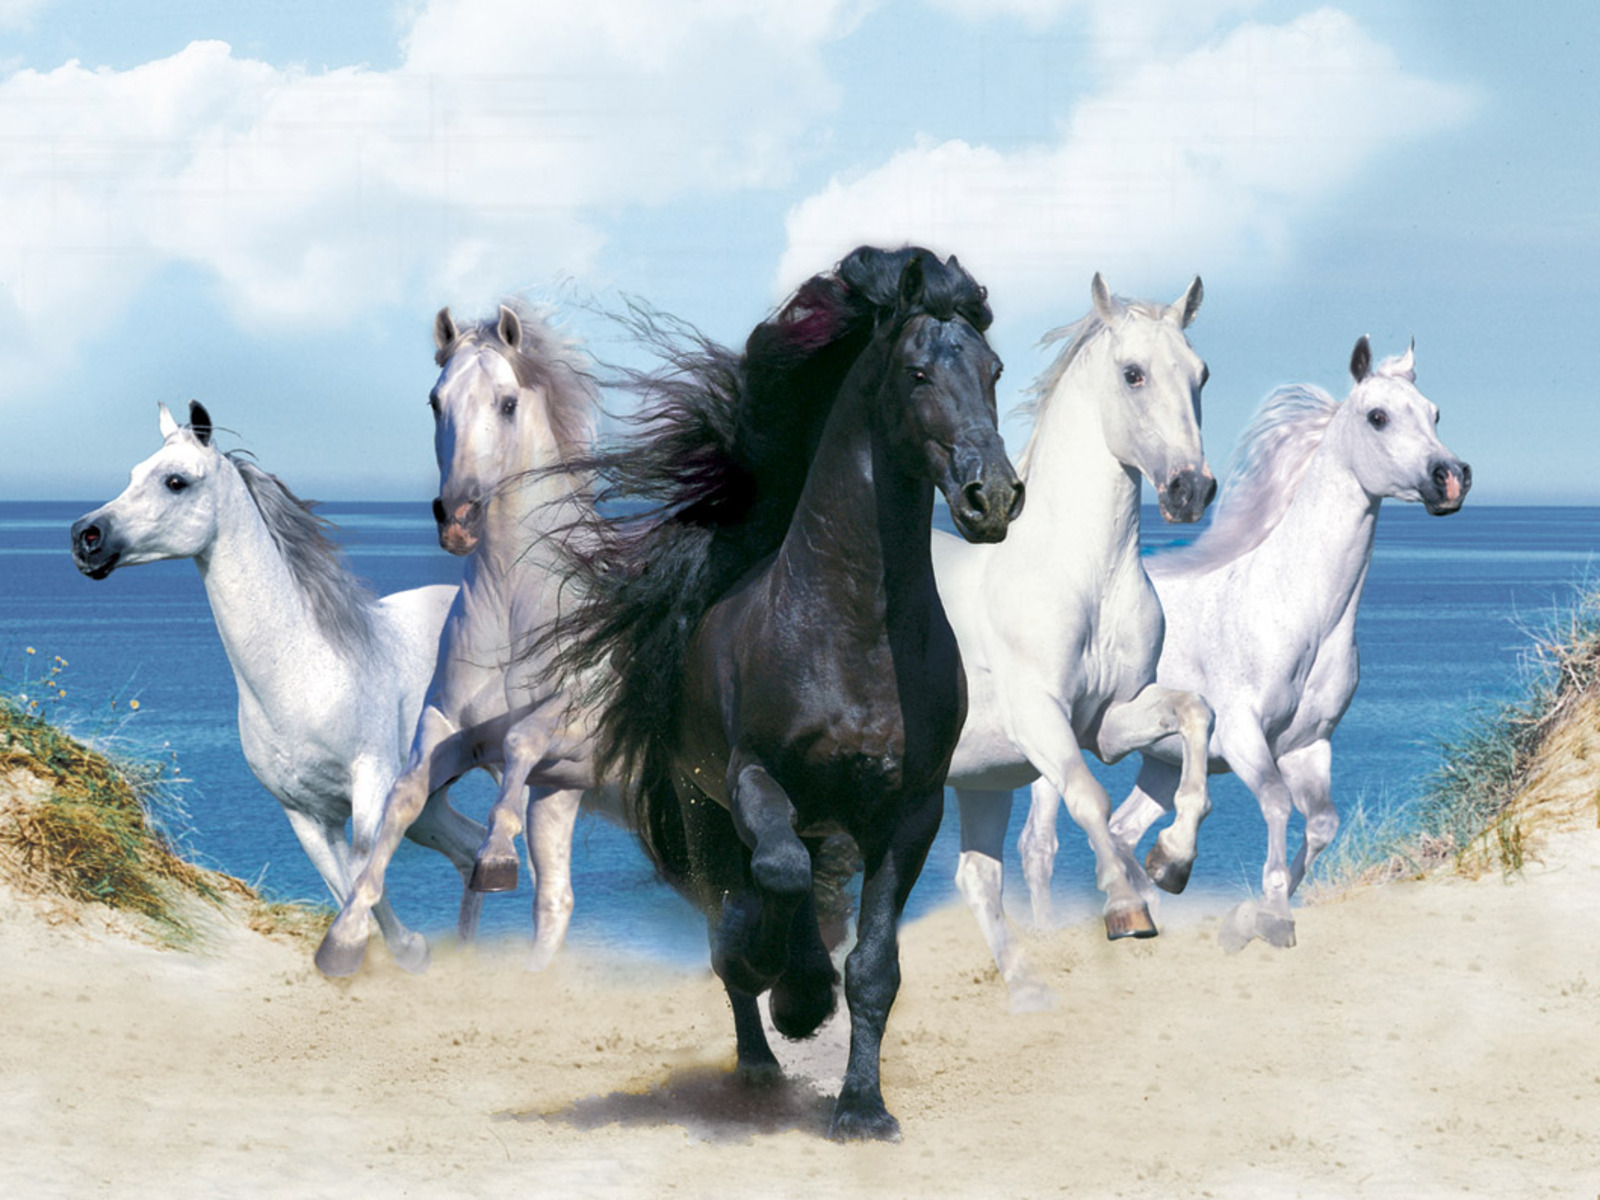 The Wallpaper Background Of Horses